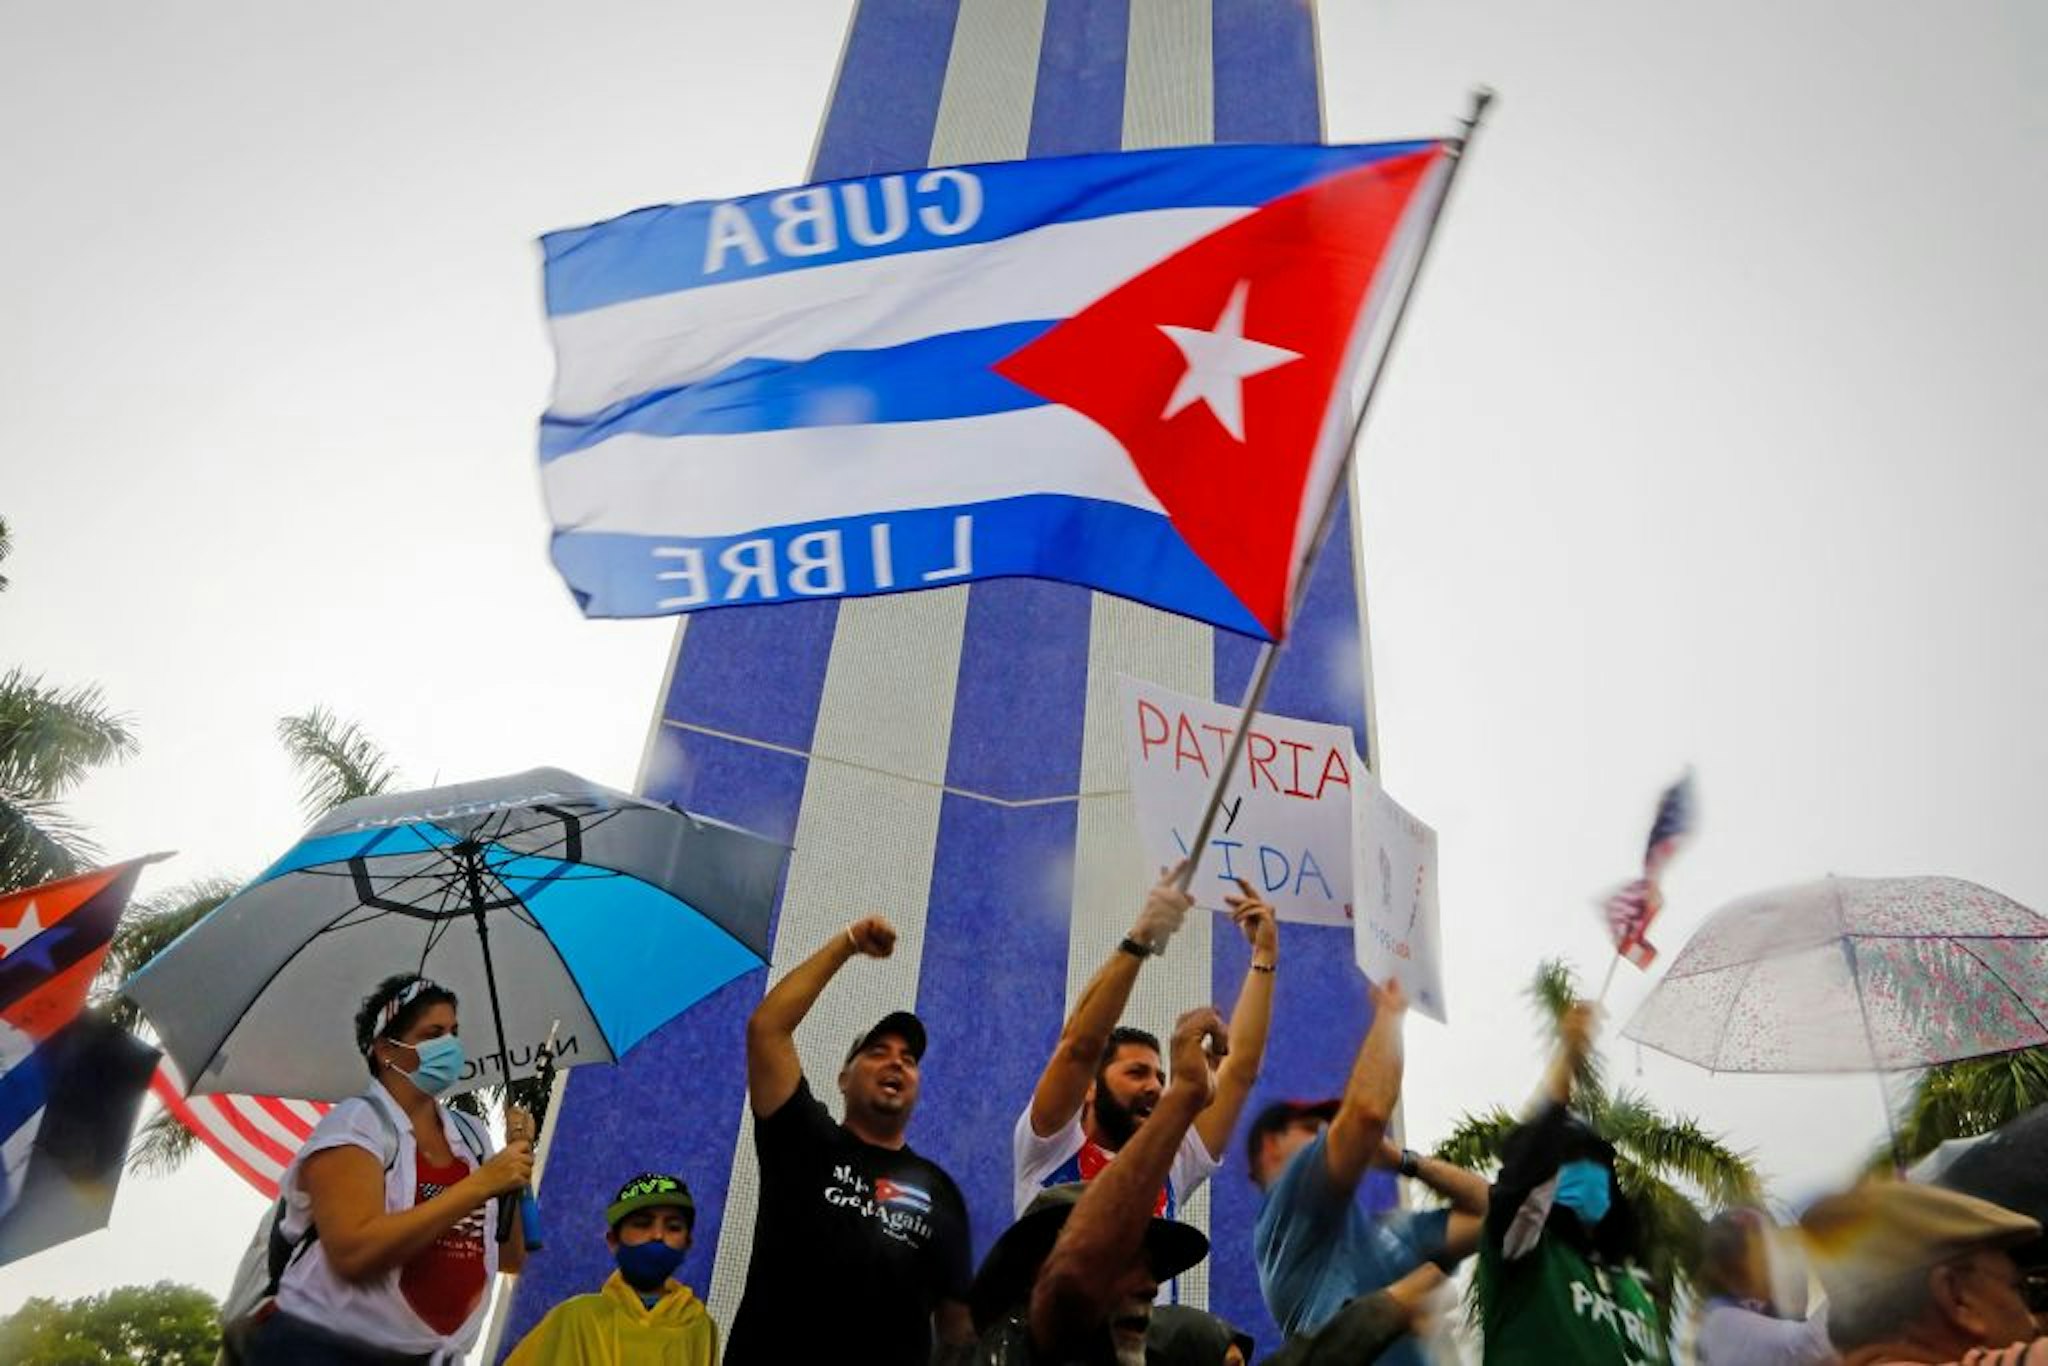 People demonstrate waving Cuban flags during a protest against the Cuban government at Tamiami Park in Miami, on July 13, 2021. - Washington warned Haitians and Cubans against trying to flee to the United States as they endure domestic unrest, saying the trip is dangerous and they would be repatriated. (Photo by Eva Marie UZCATEGUI / AFP) (Photo by EVA MARIE UZCATEGUI/AFP via Getty Images)